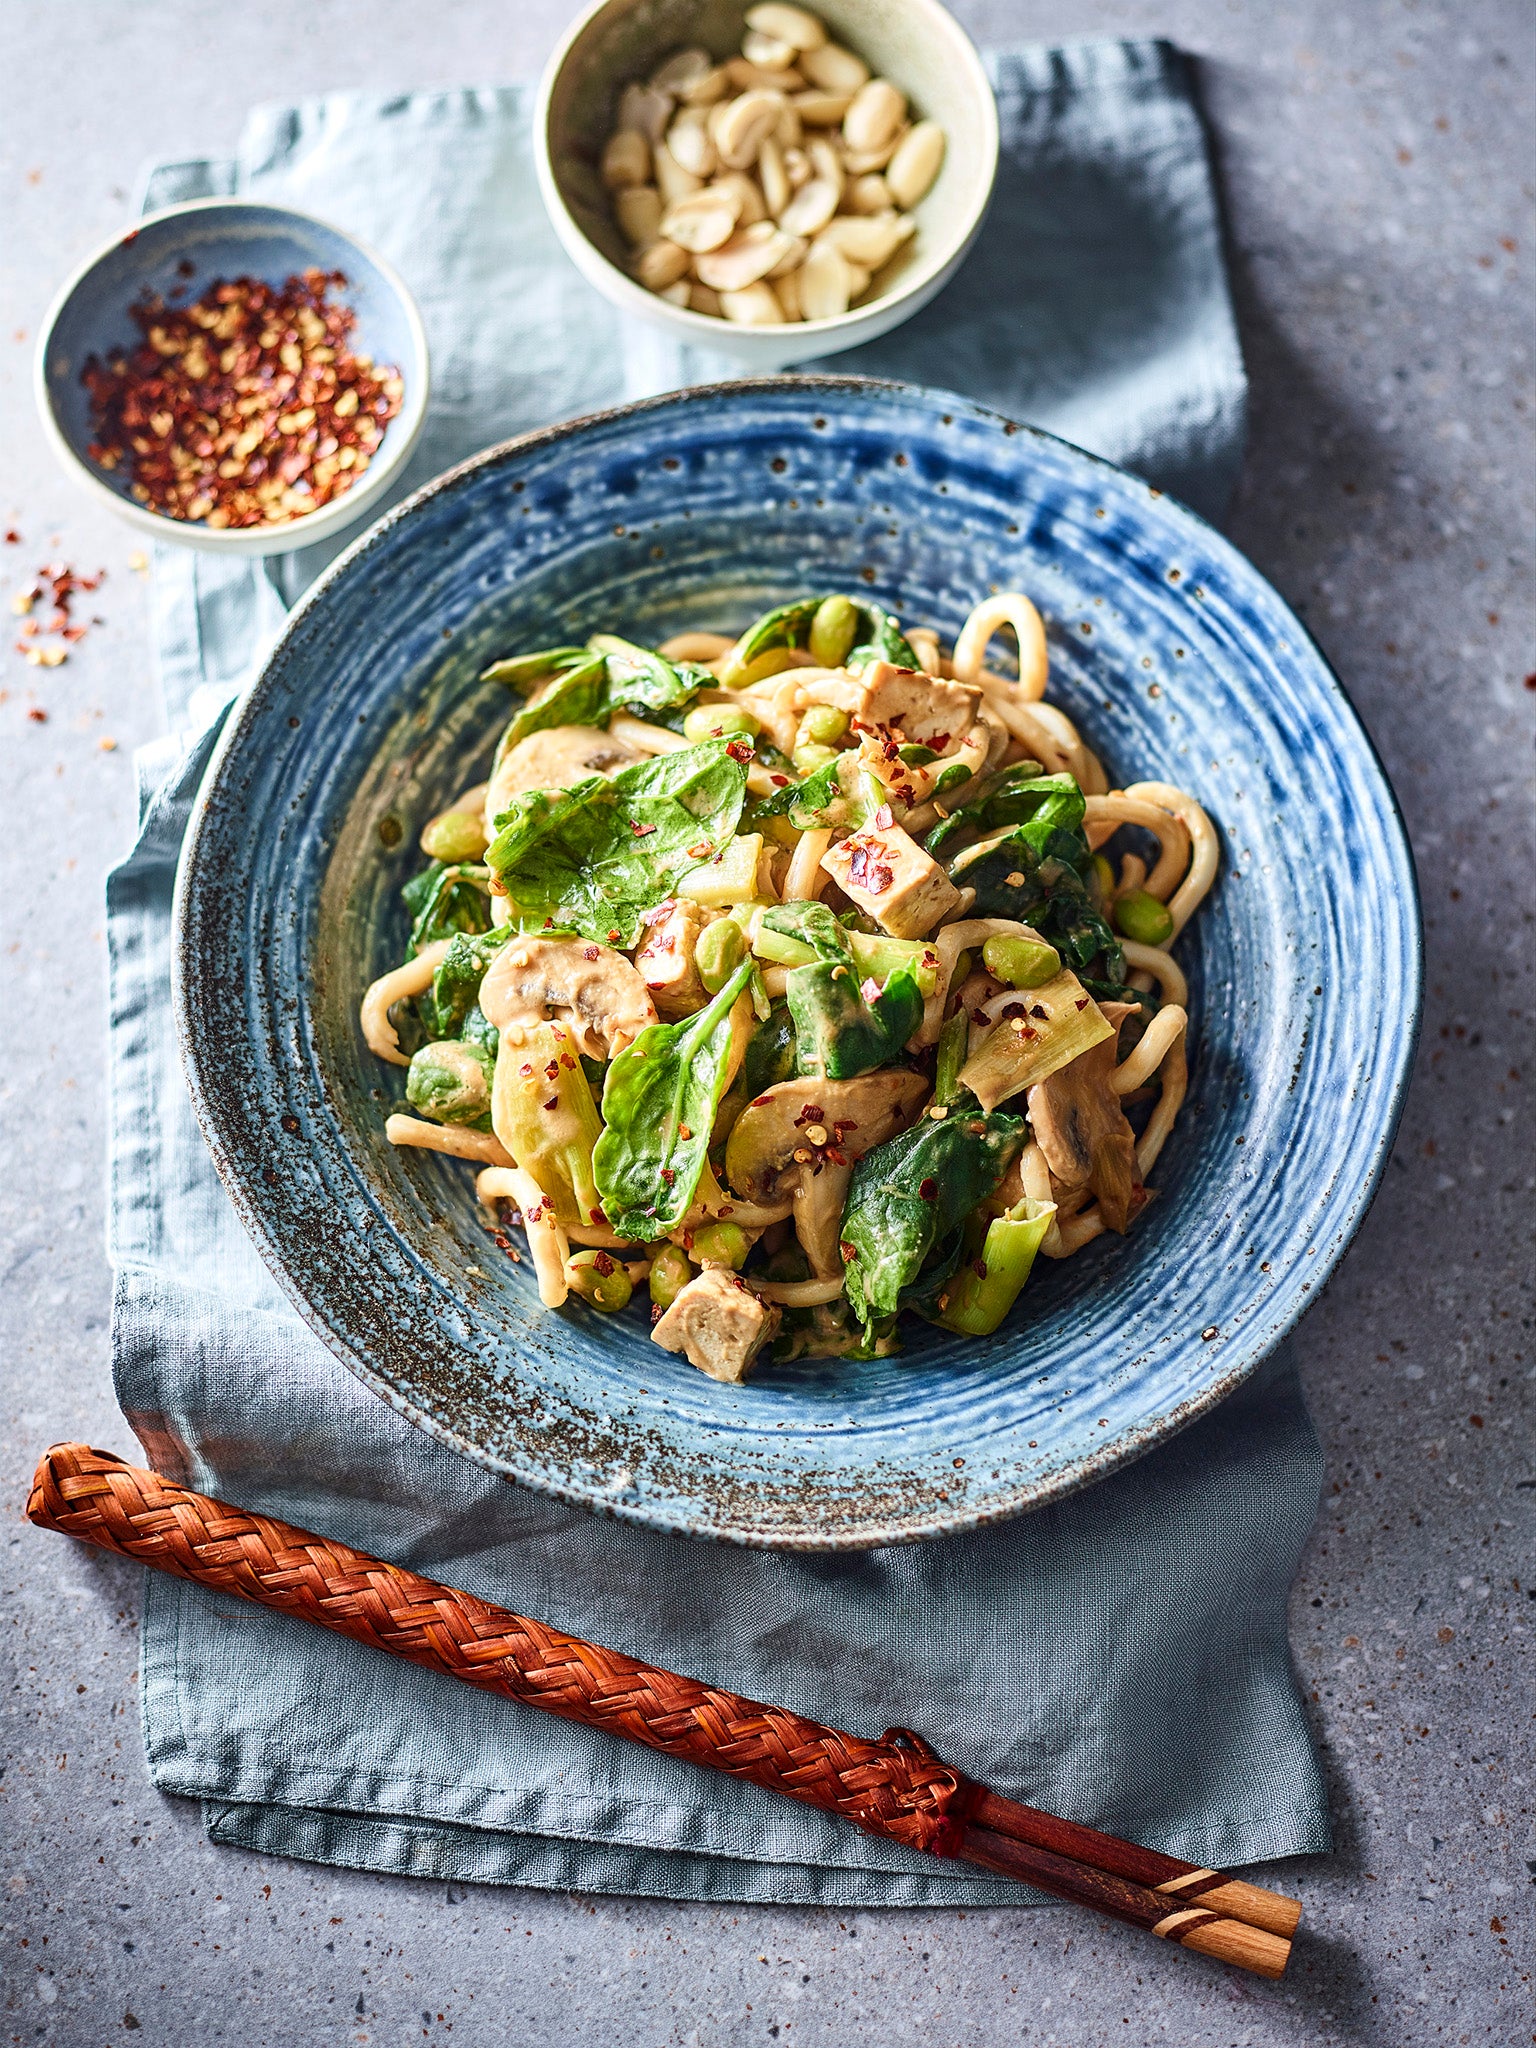 These Indonesian-inspired noodles are packed full of protein, folate and vitamin K